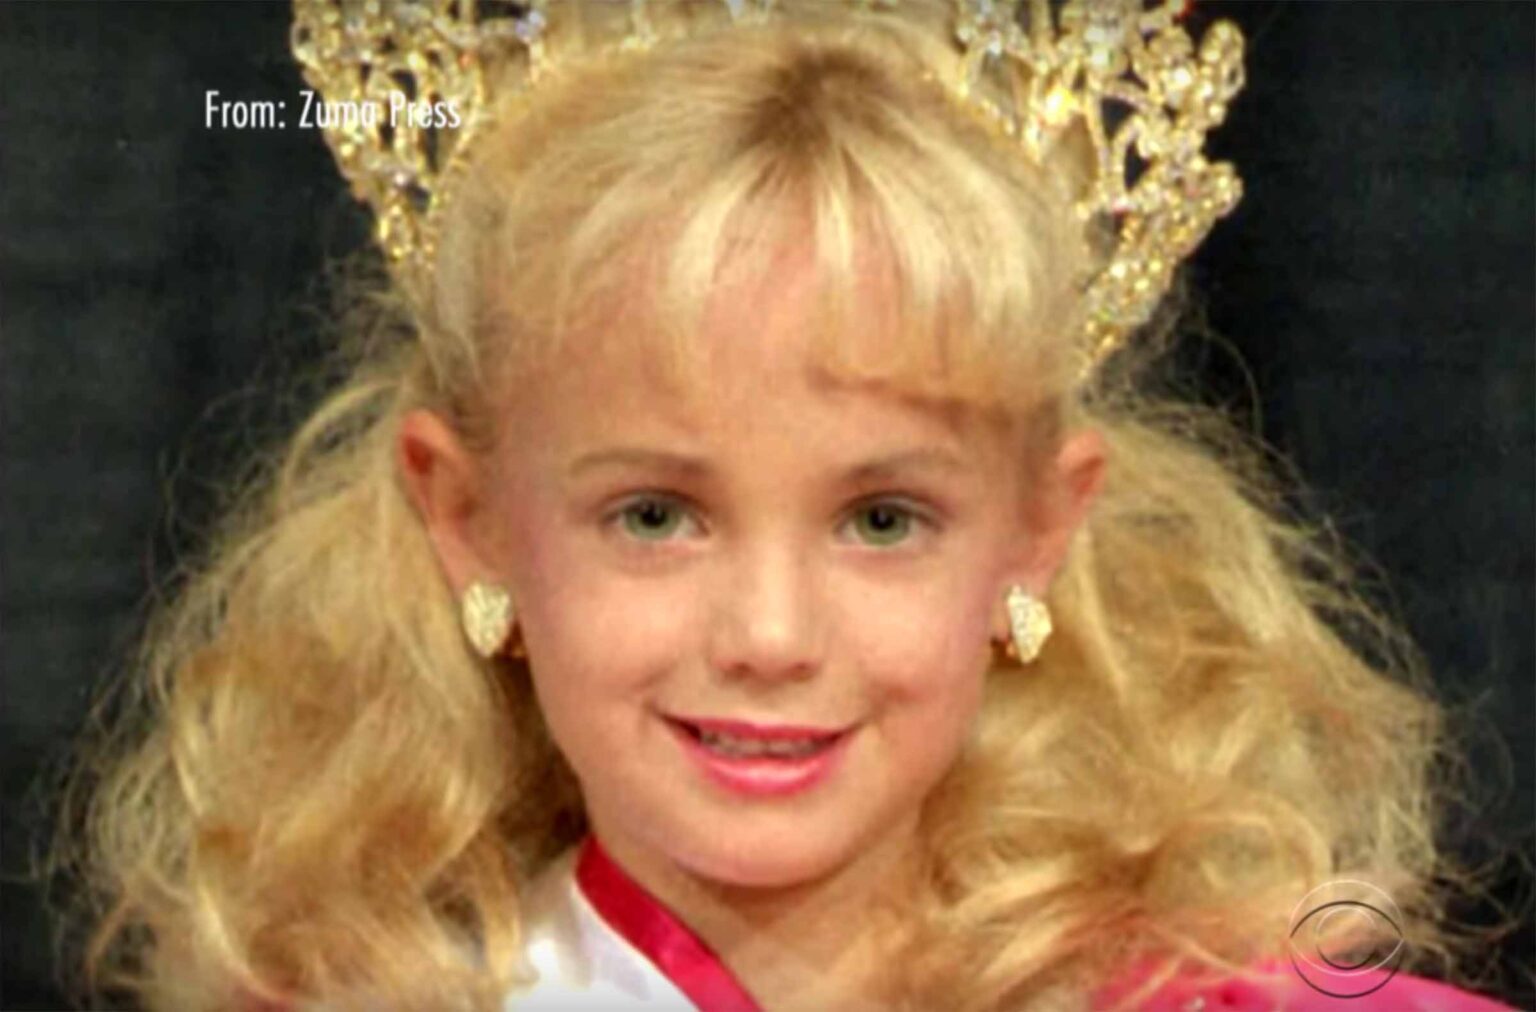 The case of JonBenét Ramsey has been covered by everyone, yet her killer has yet to be discovered. So who killed the pageant queen?